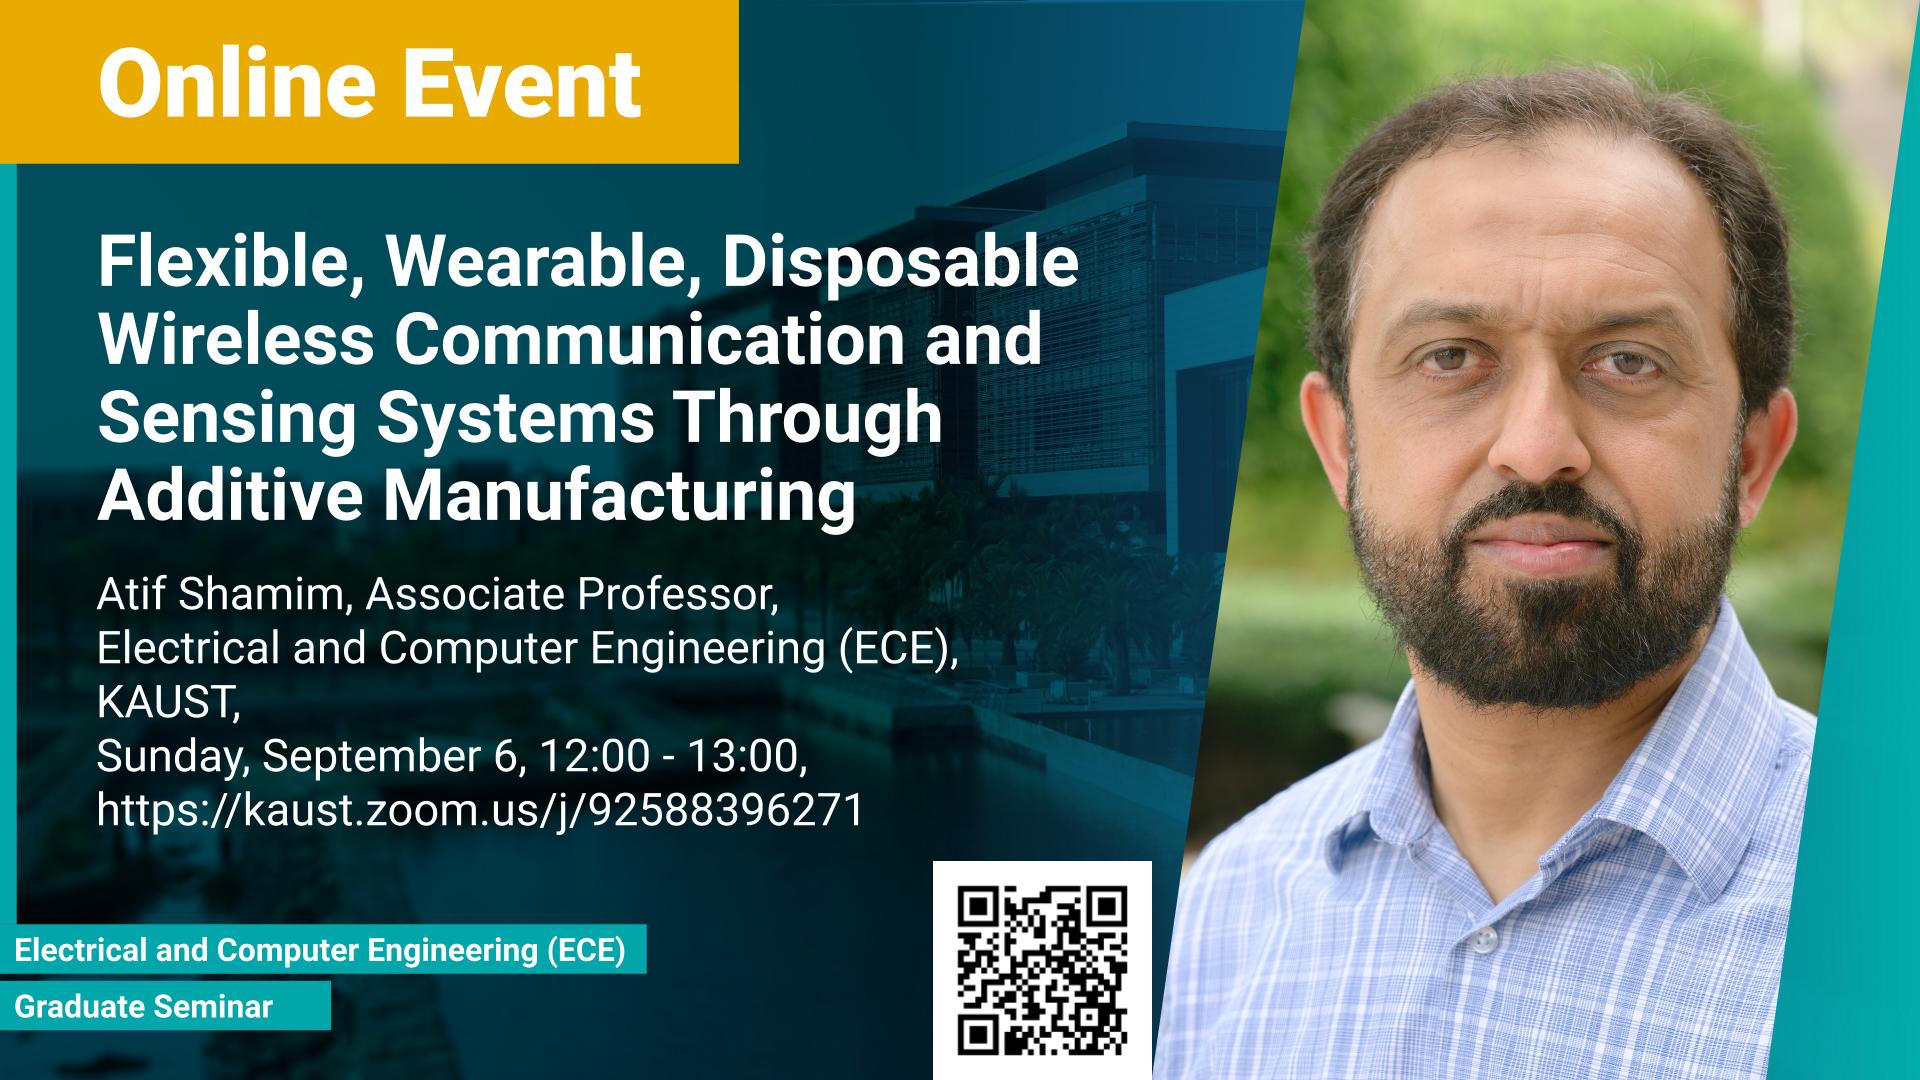 KAUST CEMSE Graduate Seminar Event Atif Shamim Flexible Wearable Disposable Wireless Communication and Sensing Systems Through Additive Manufacturing